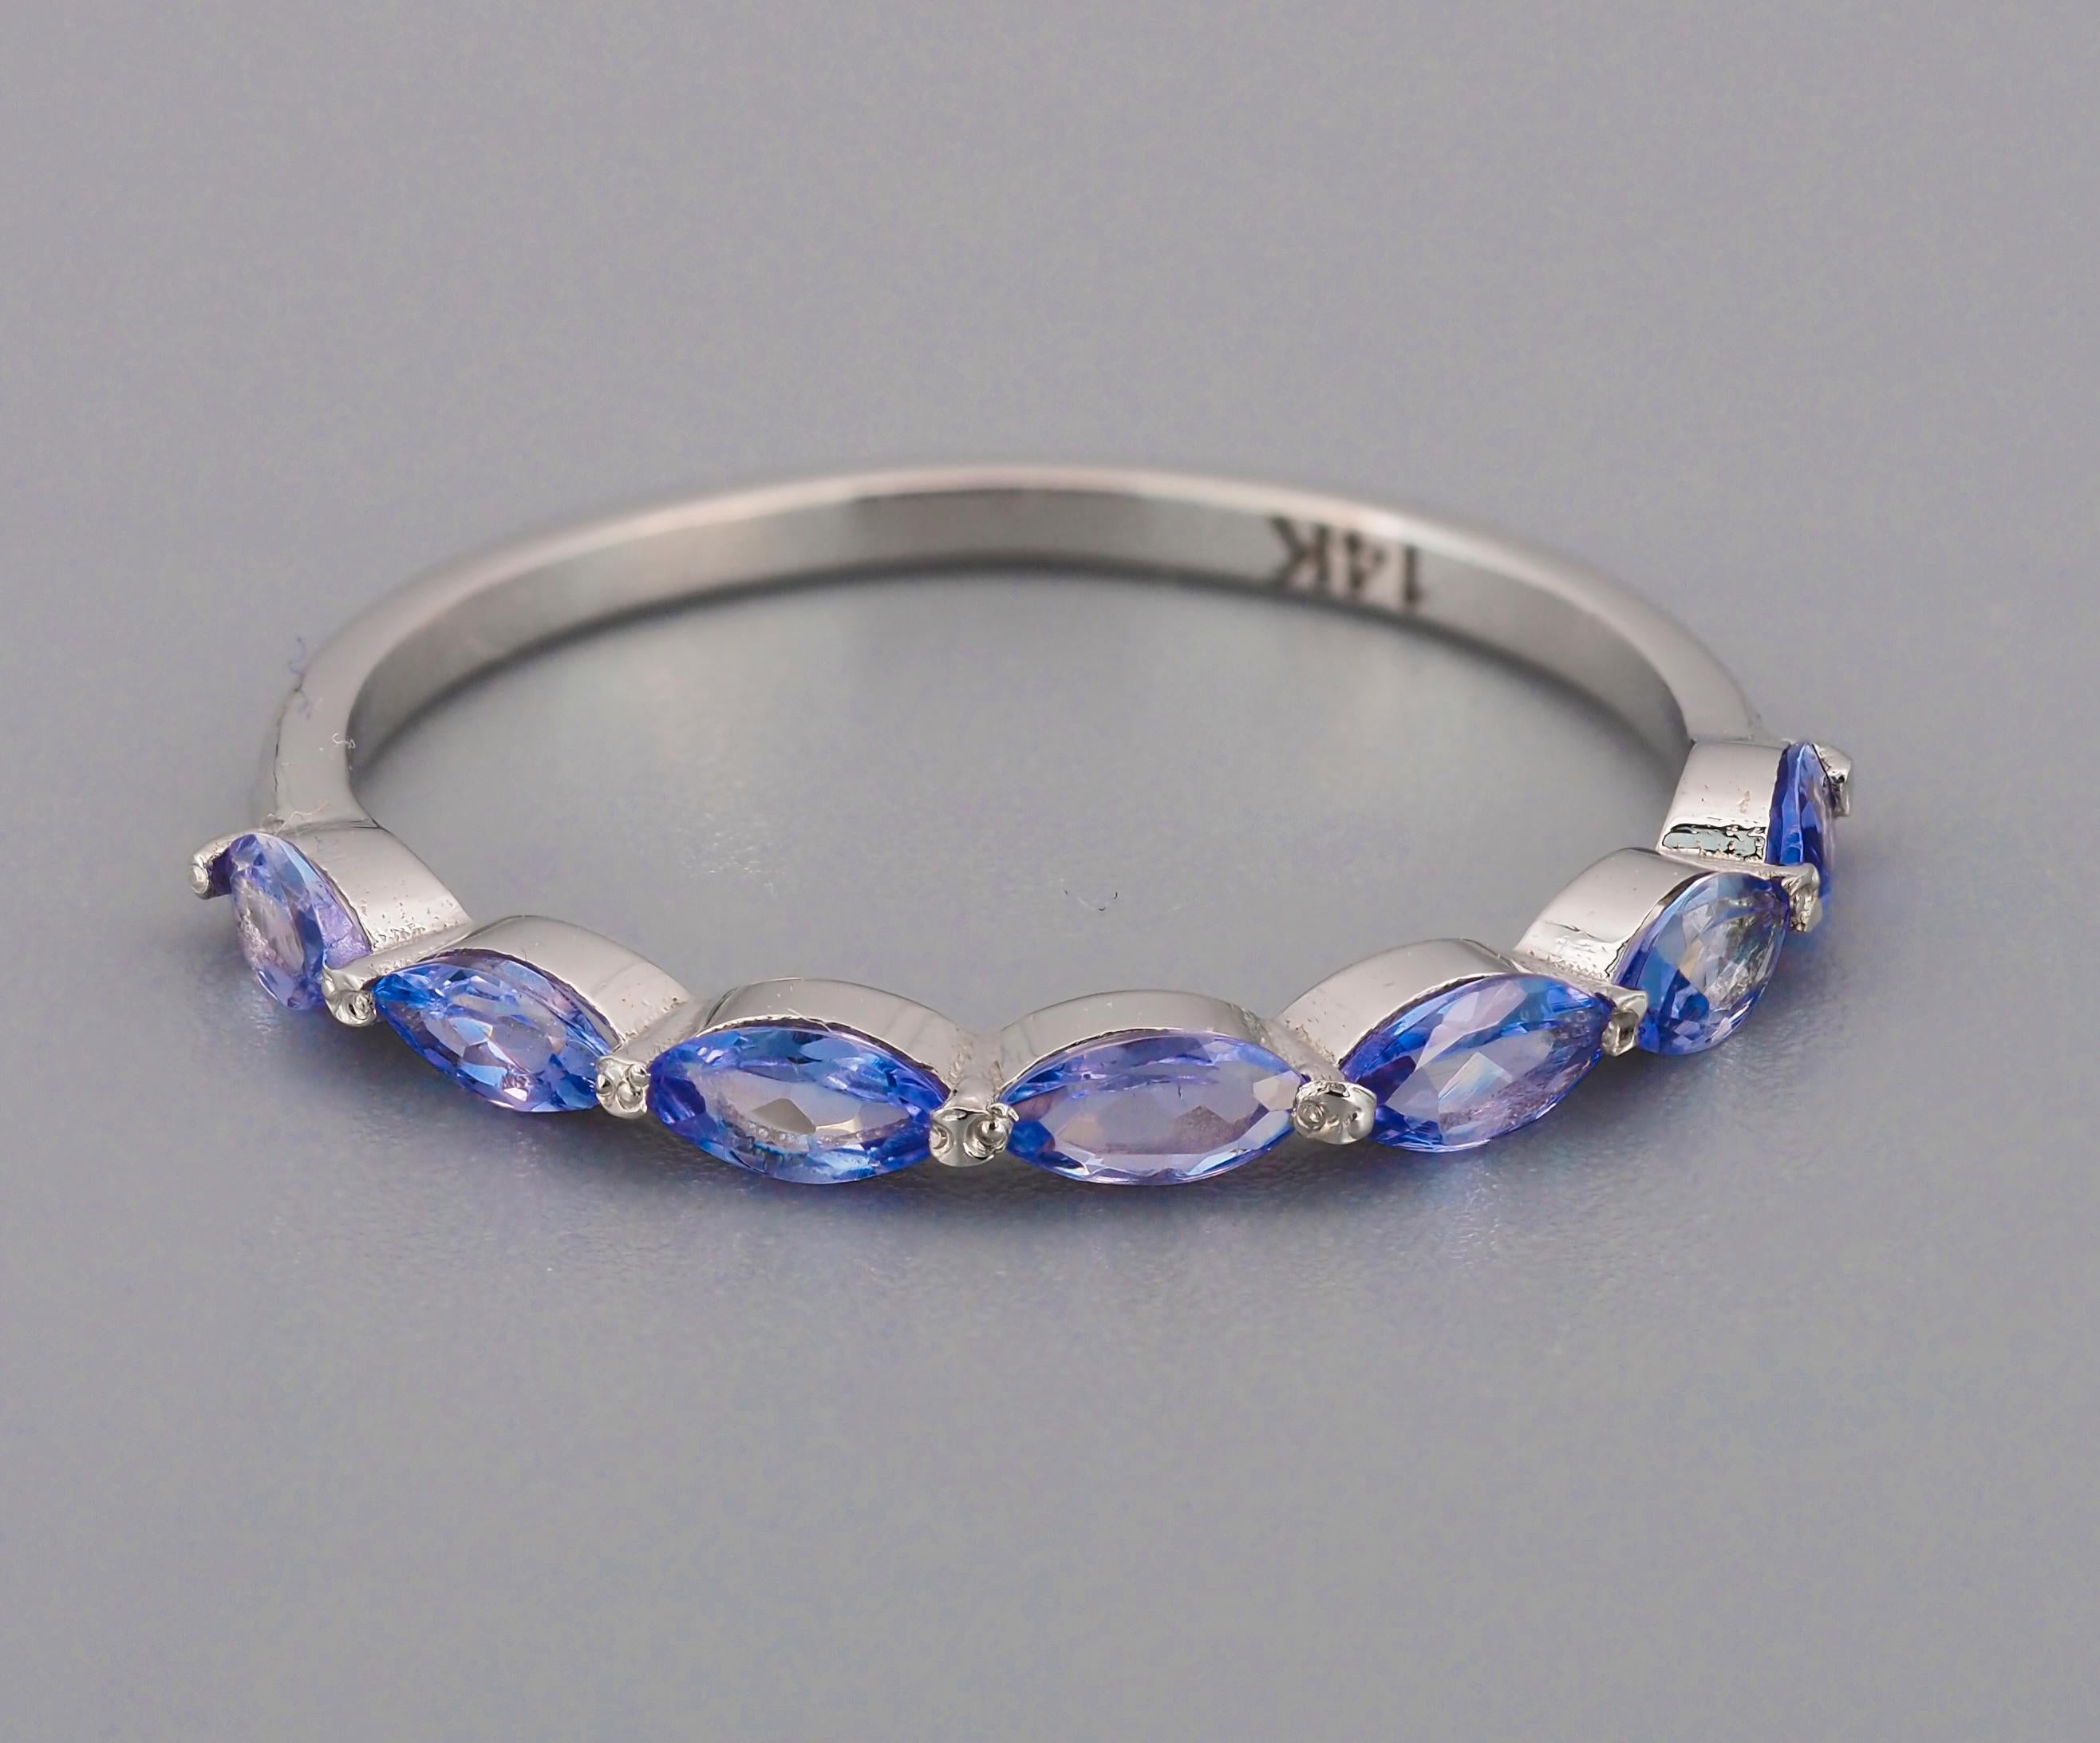 Half eternity tanzanite ring in 14k gold. 
Marquise tanzanites ring. Delicate tanzanite ring. Semi eternity tanzanite ring.

Metal: 14k gold
Weight: 1.3 g. depends from size.

Set with tanzanites
Marquise shape, light violetish blue color, aprx 1.00